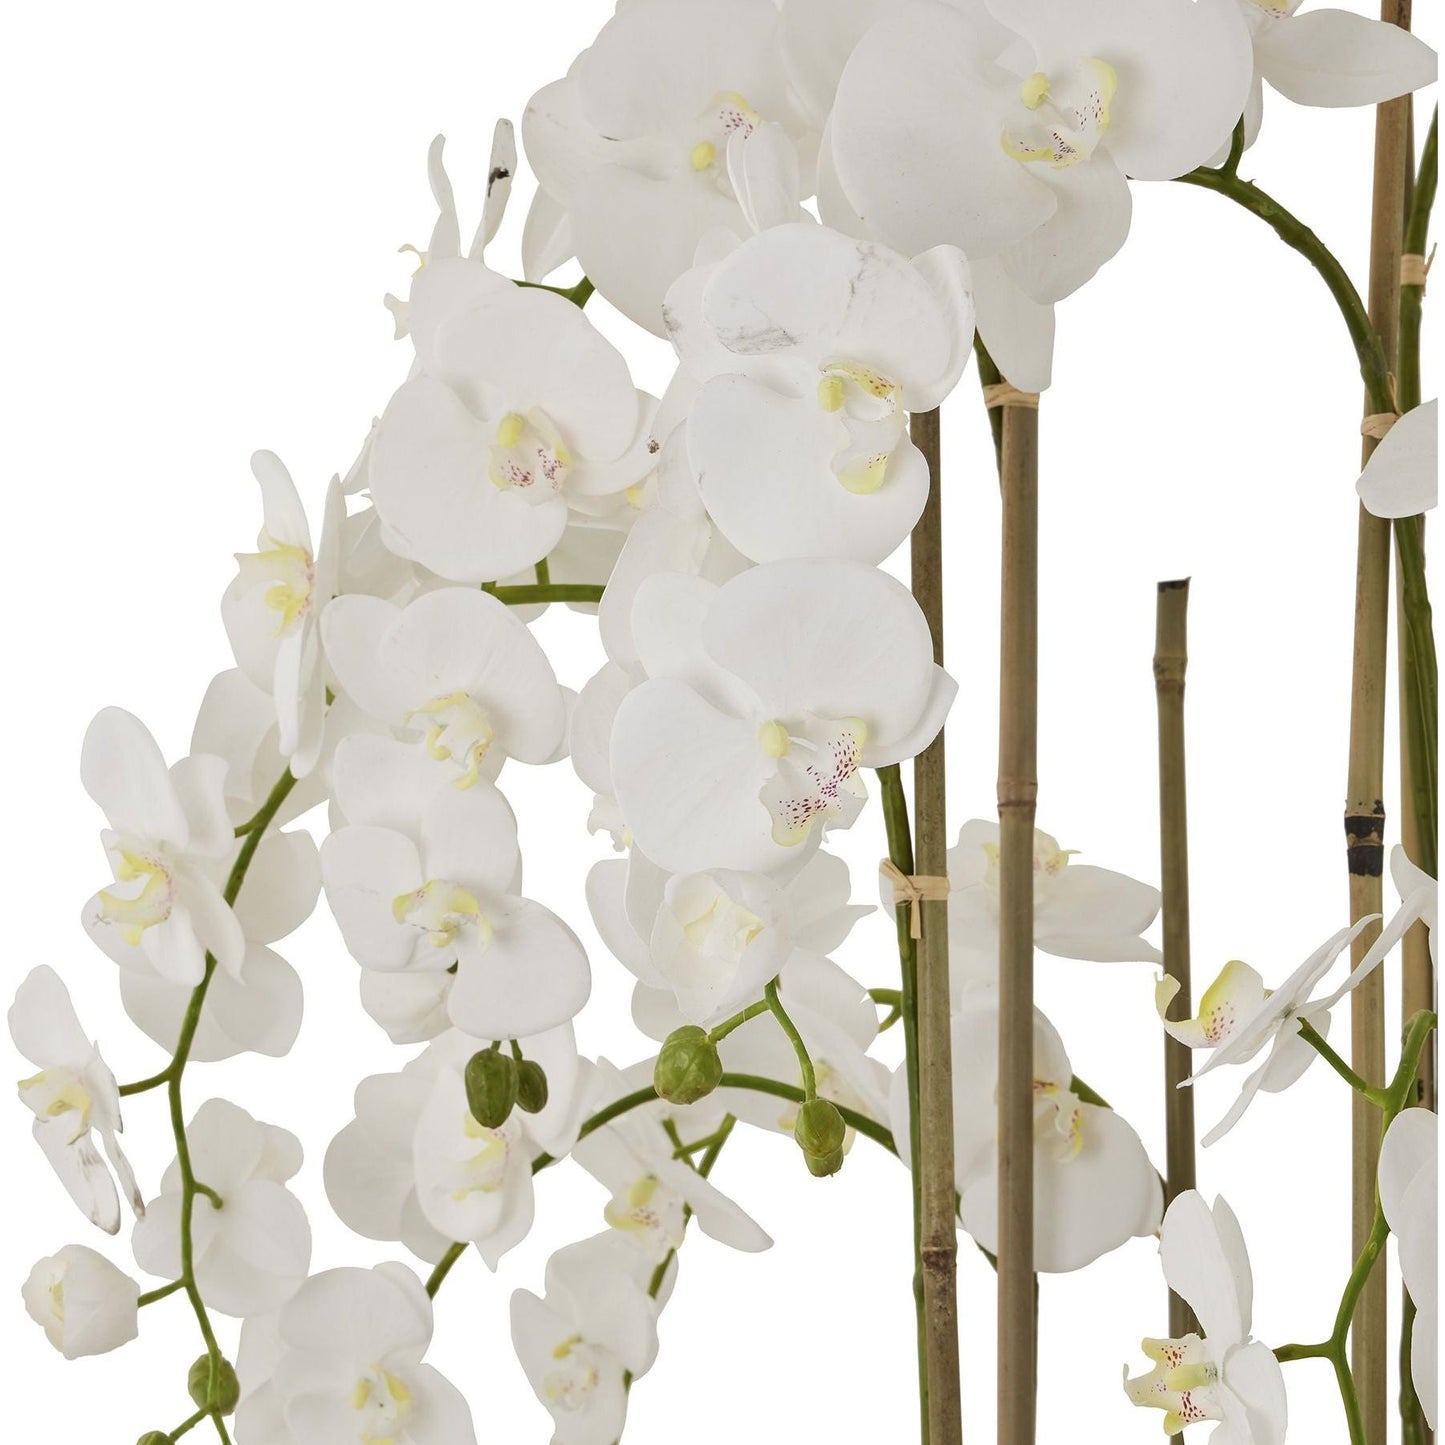 Large White Orchid In Antique Stone Pot - Ashton and Finch